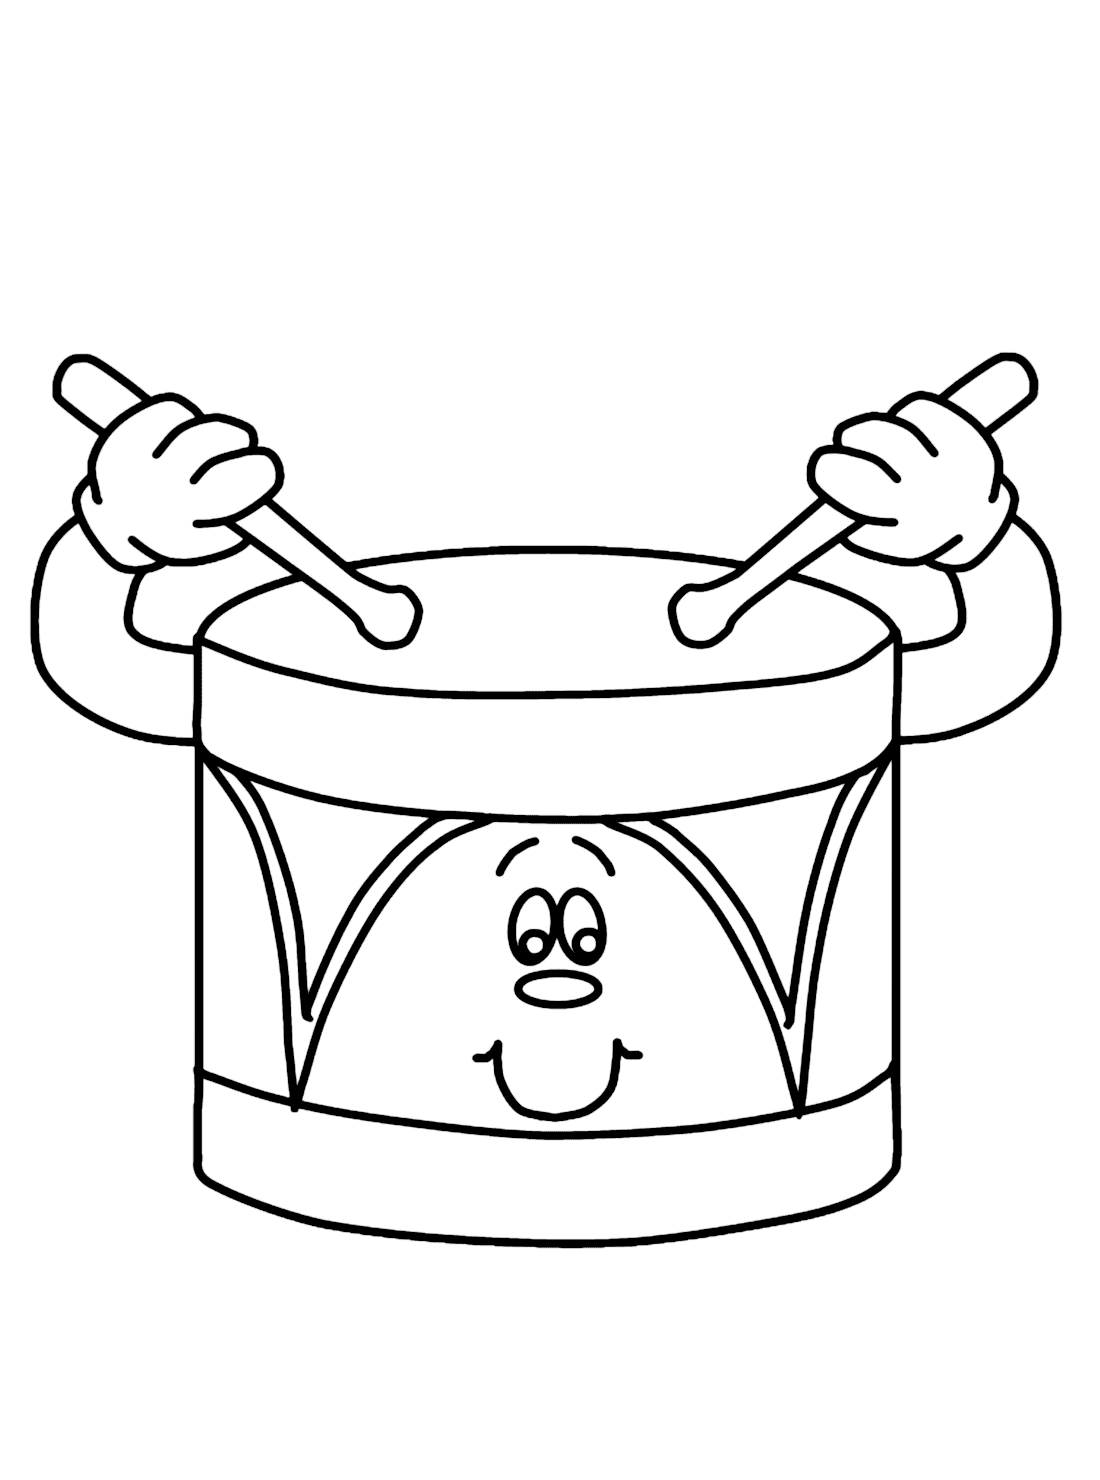 Cute Drum Coloring Pages